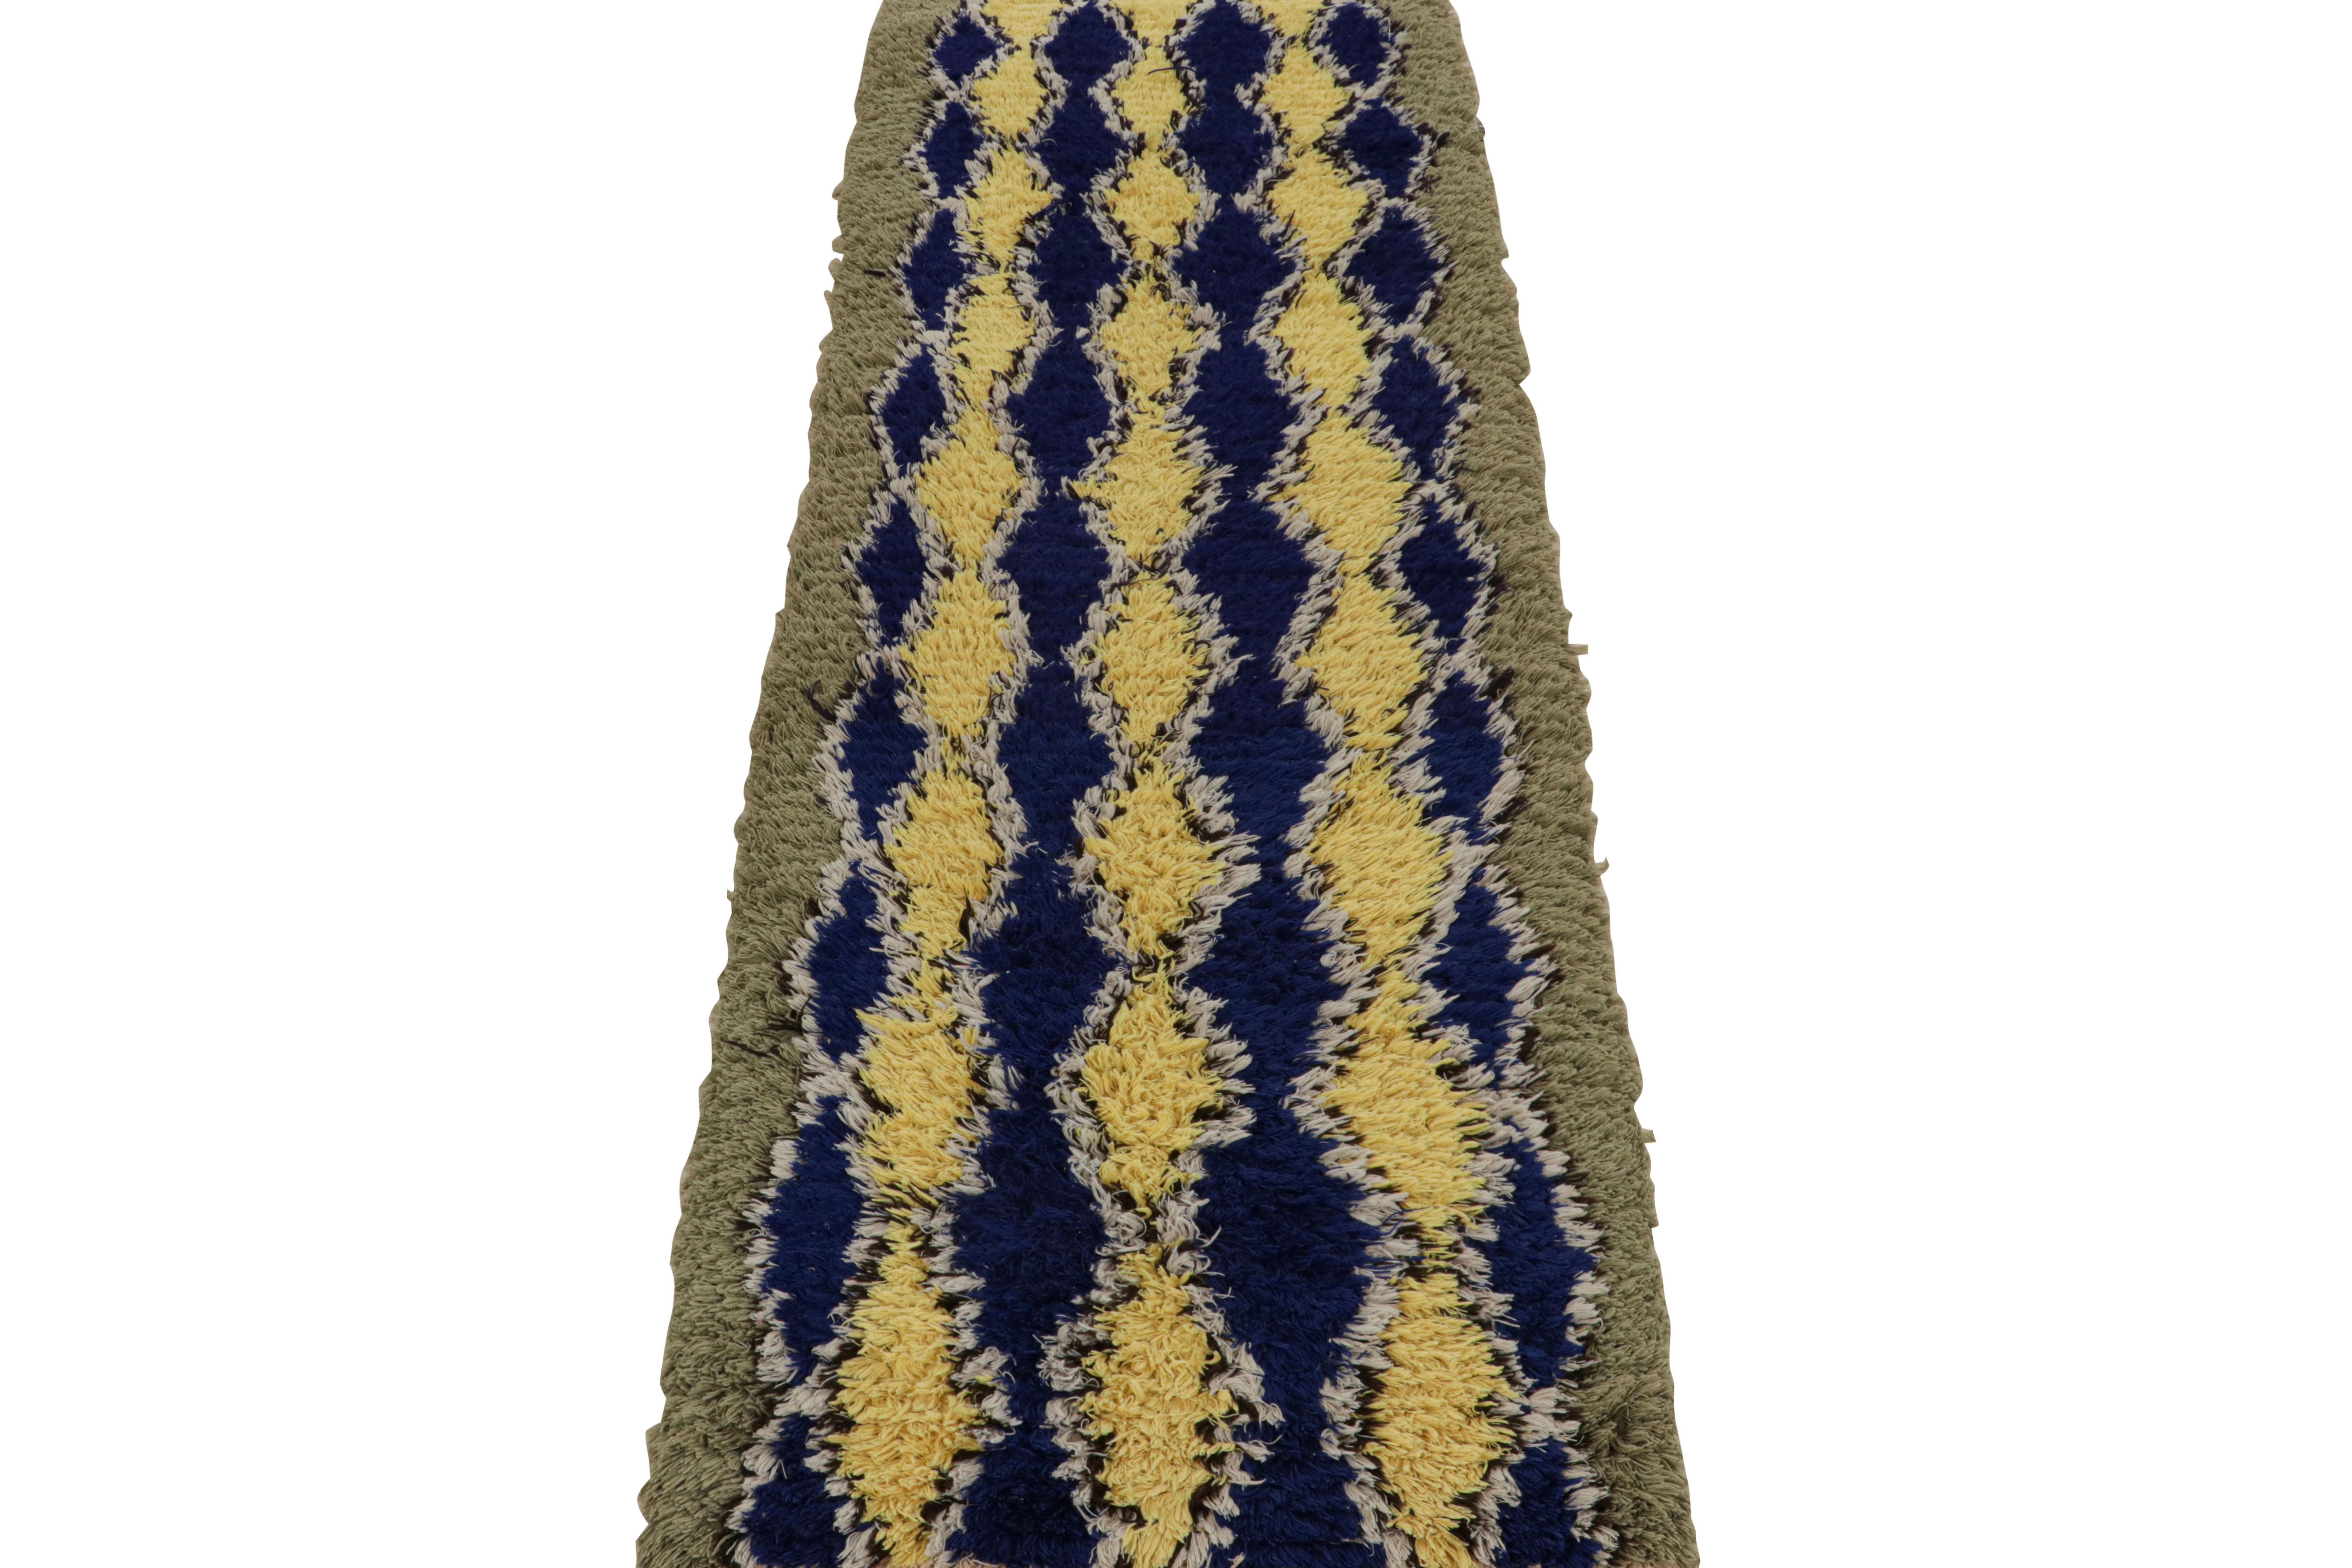 Hand-knotted in wool circa 1950-1960, this 2x8 vintage Moroccan runner rug with diamond geometric patterns on a navy blue field, hails from the Azilal tribe.  

On the Design: 

Connoisseurs will further admire this as an exemplary piece of the